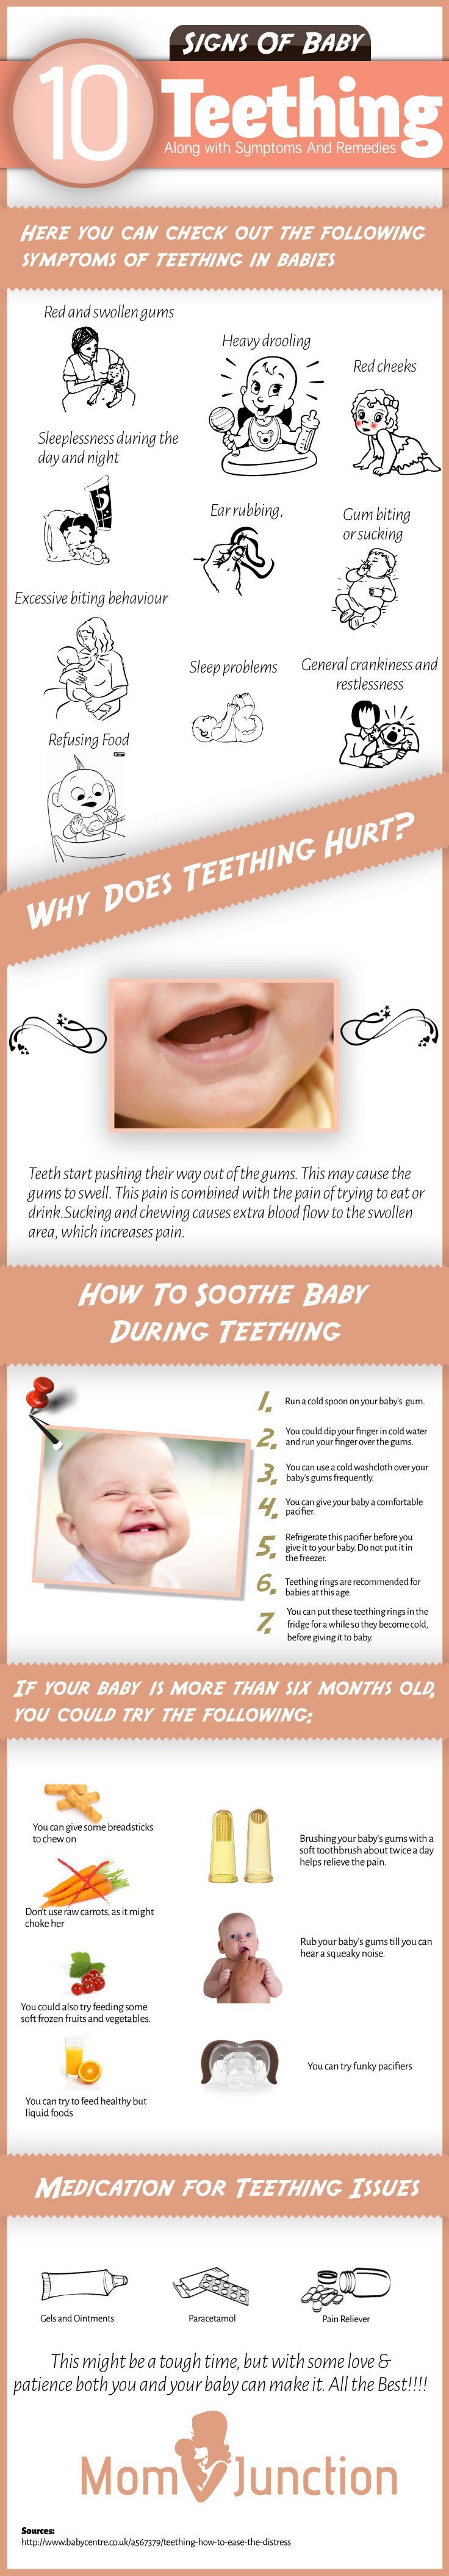 13 Signs Of Baby Teething Along Wit